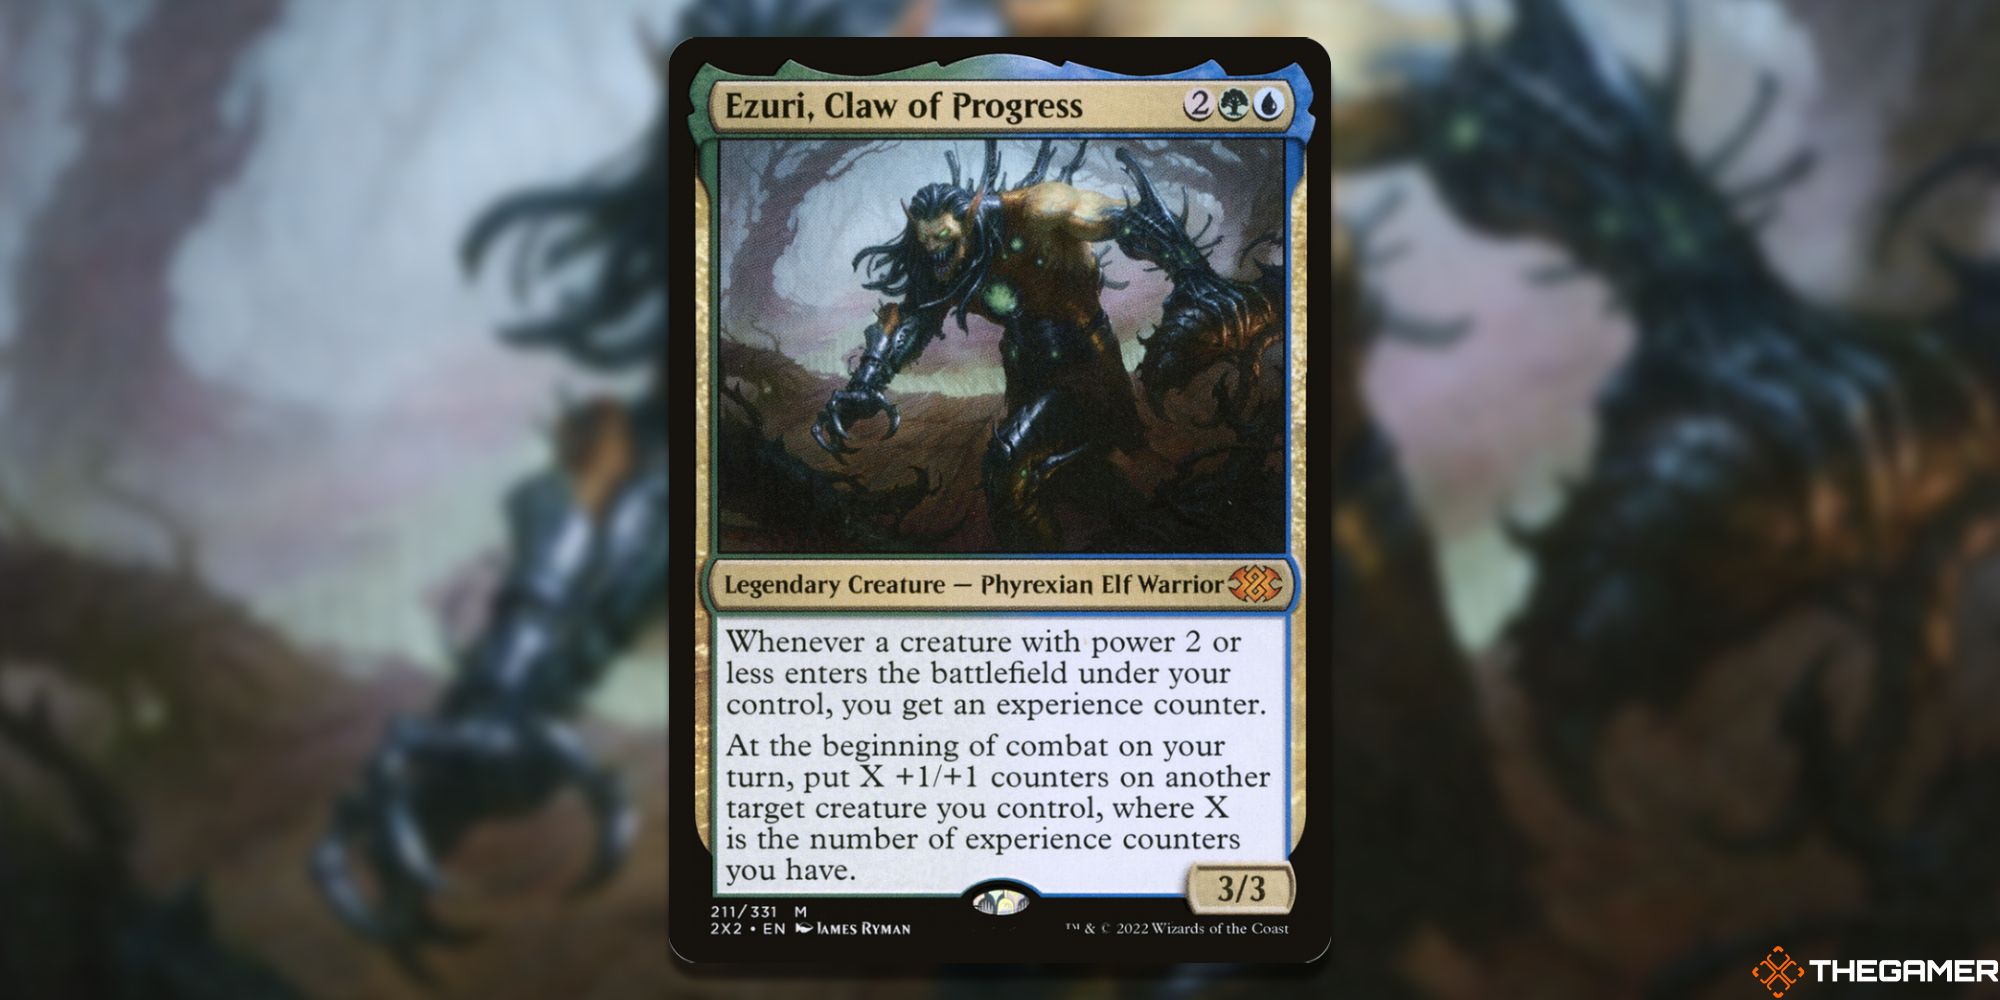 Image of the Ezuri, Claw of Progress  card in Magic: The Gathering, with art by James Ryman